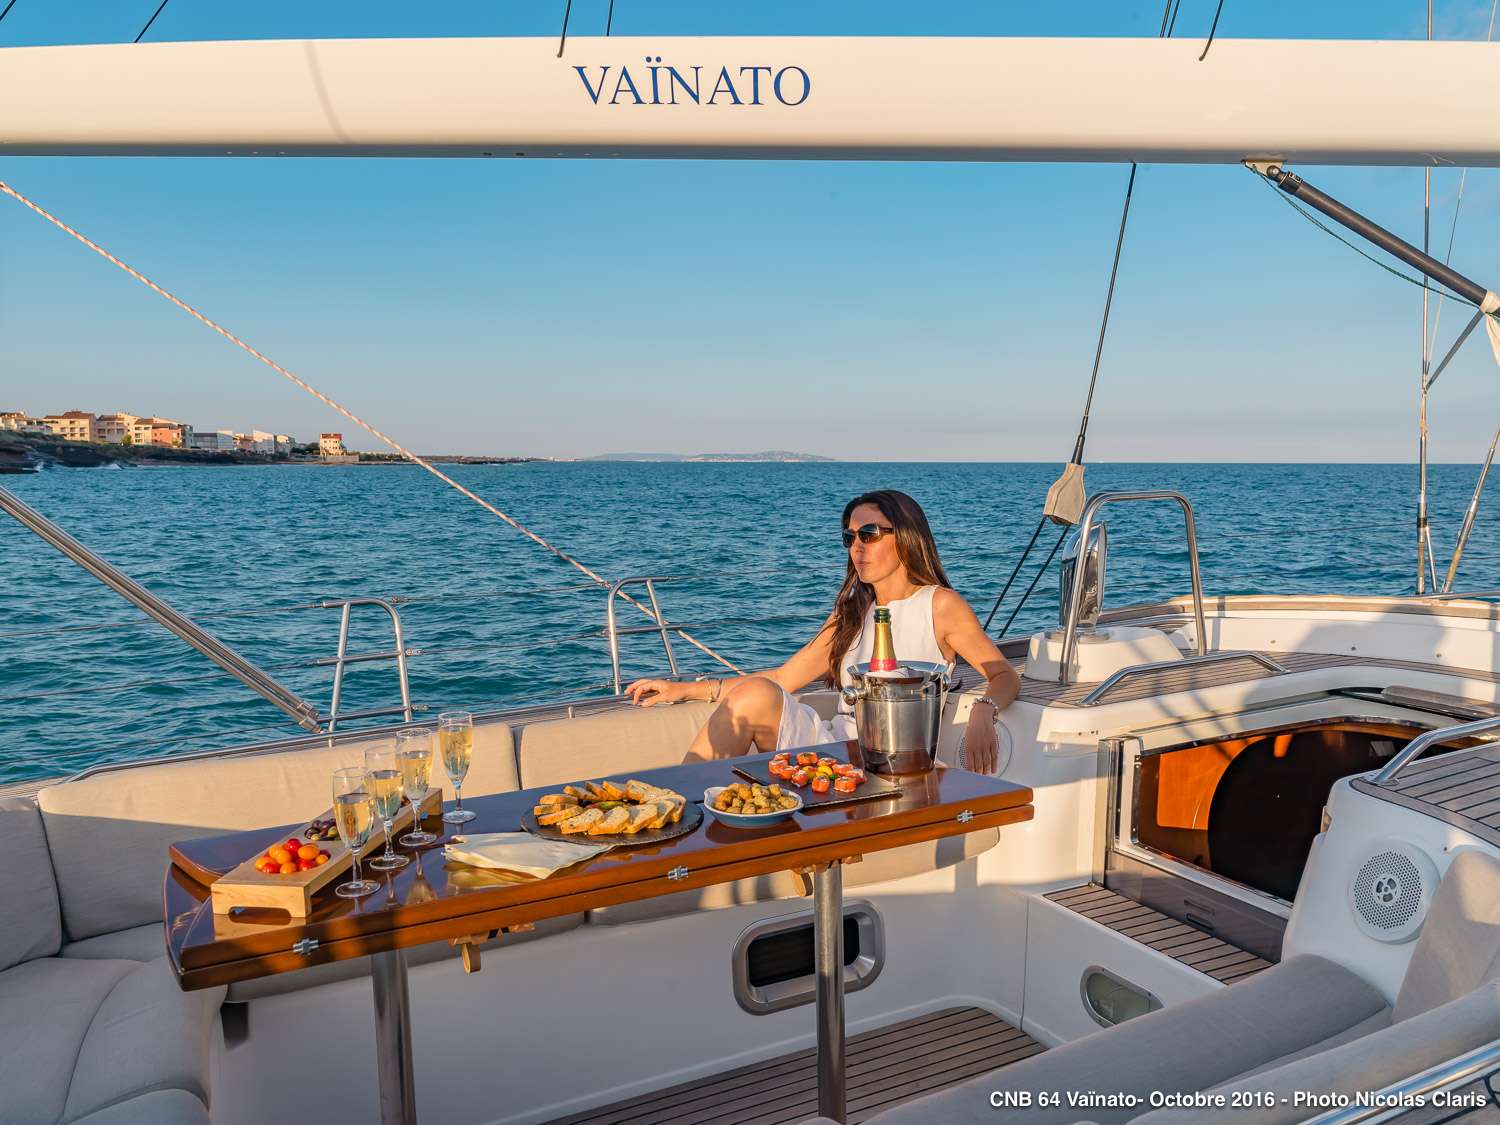 VAINATO is a CNB 64' from 2001 and had a major refit in 2014. She has 2 crew members and accommodates up to 6 guests in 3 double cabins including an aft master cabin. She is based in the South of France and operates charters from the French Riviera and Corsica.